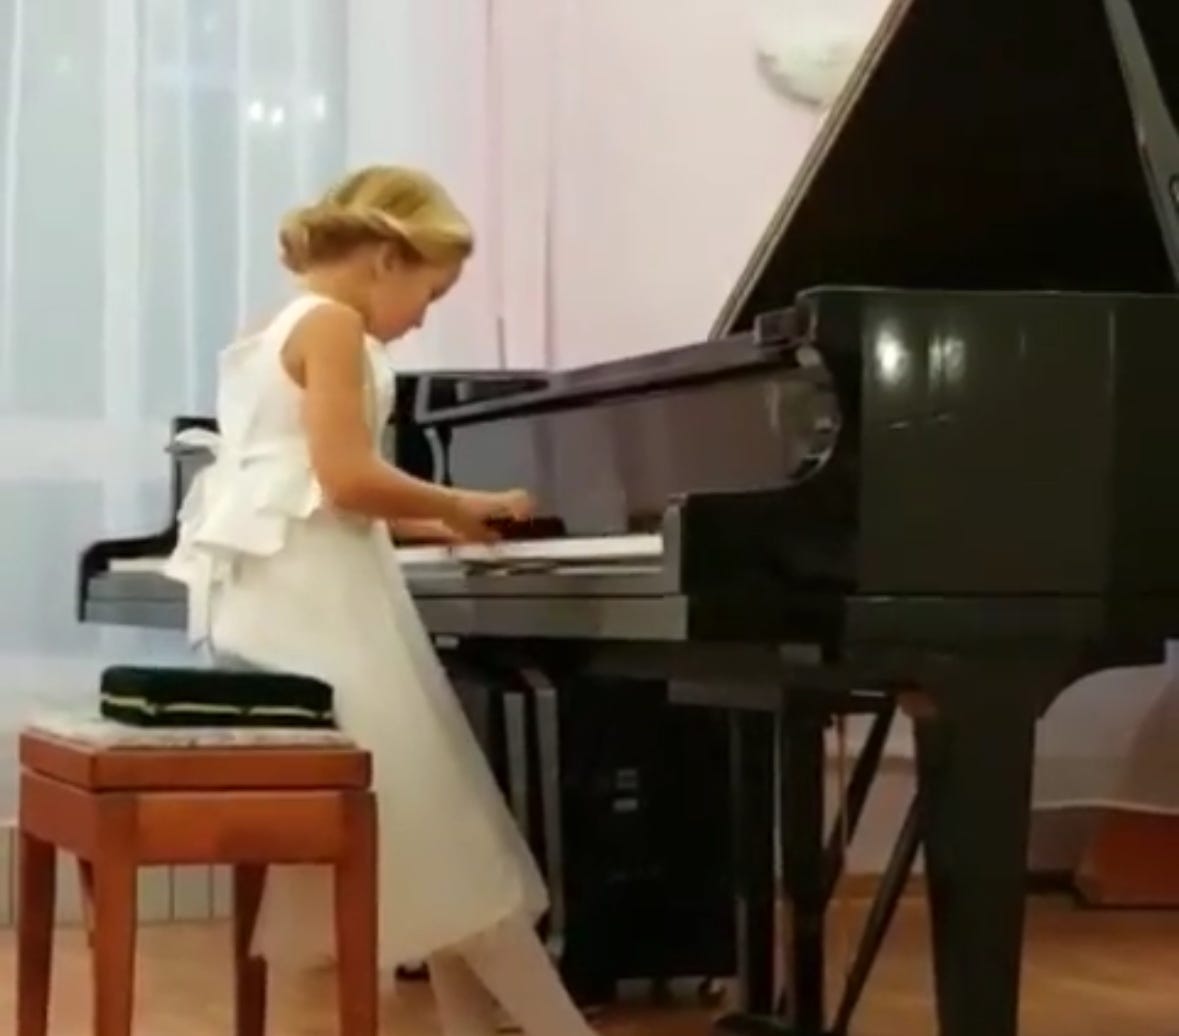 A9 year old girl, in white formal dress, is playing classical music on the baby grand piano.